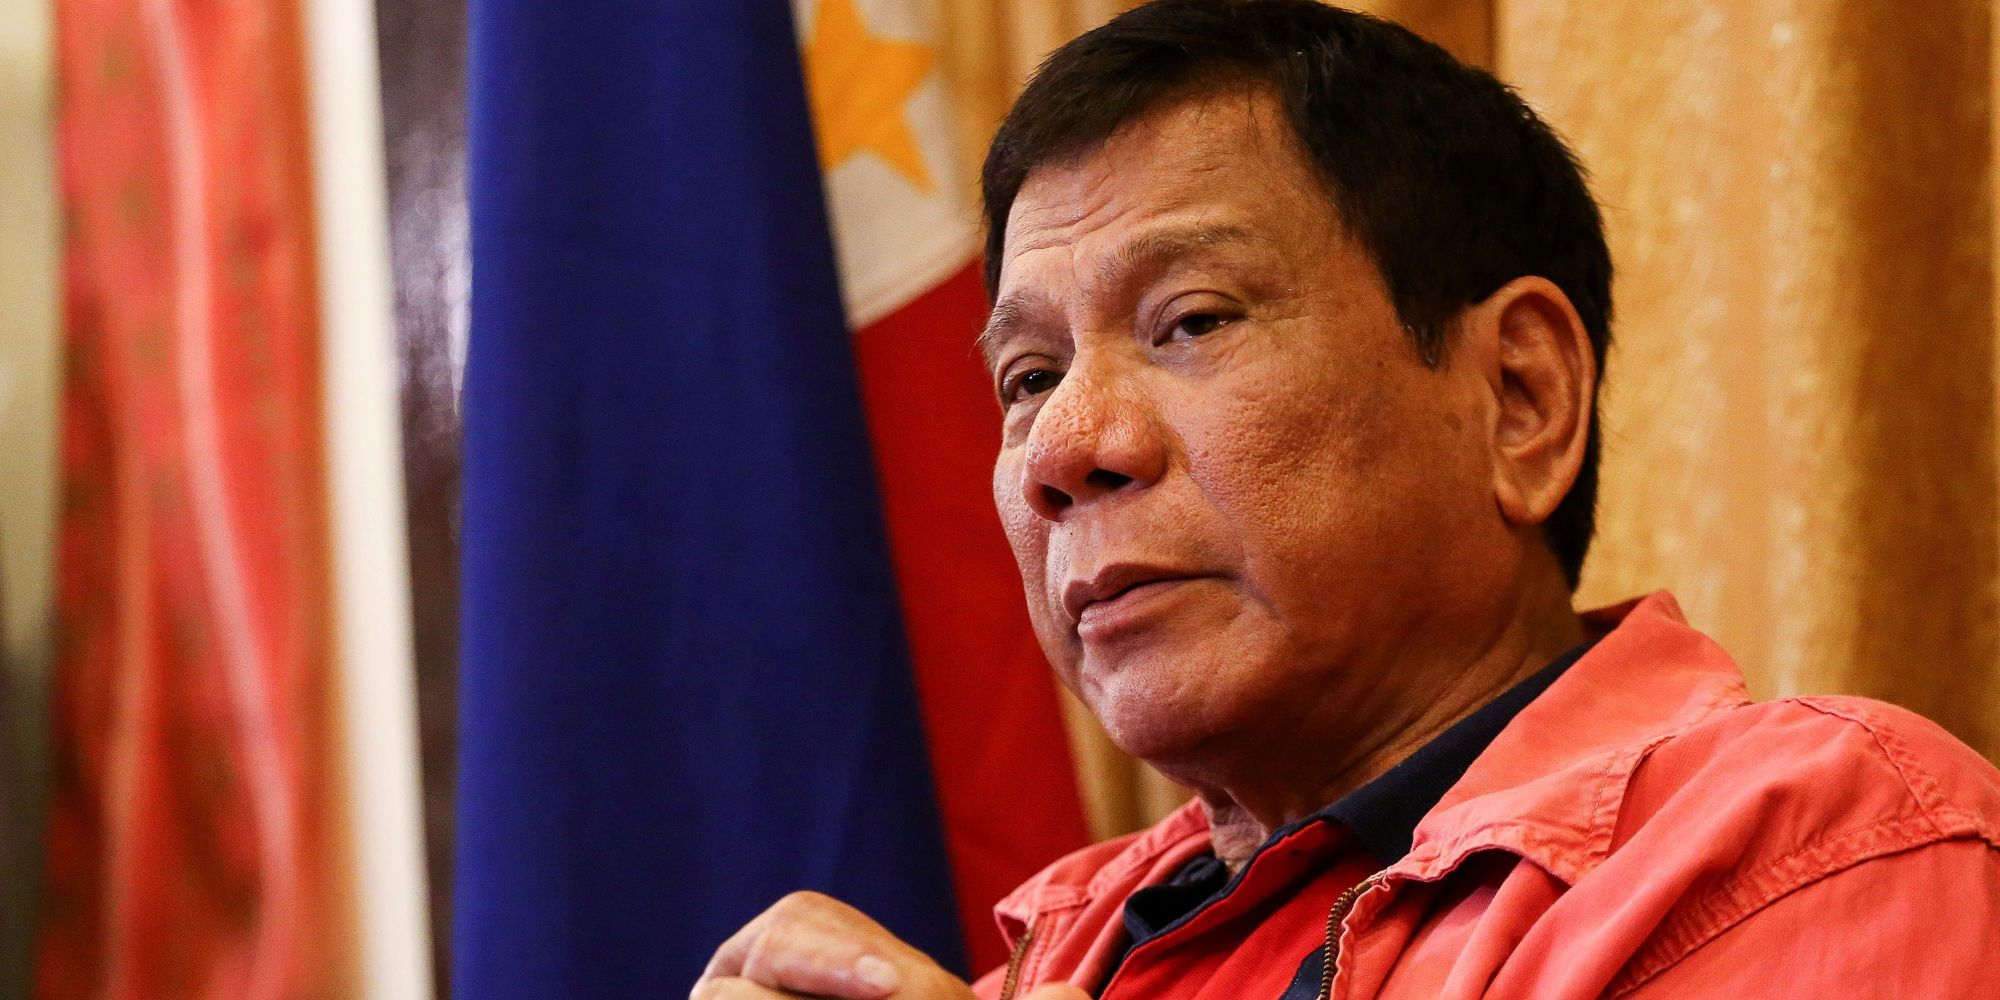 Philippines' president-elect Rodrigo Duterte speaks during a press conference in Davao City, in southern island of Mindanao on May 26, 2016. Explosive incoming Philippine president Rodrigo Duterte has launched a series of obscenity-filled attacks on the Catholic Church, branding local bishops corrupt "sons of whores" who are to be blamed for the nation's fast-growing population. / AFP / MANMAN DEJETO (Photo credit should read MANMAN DEJETO/AFP/Getty Images)